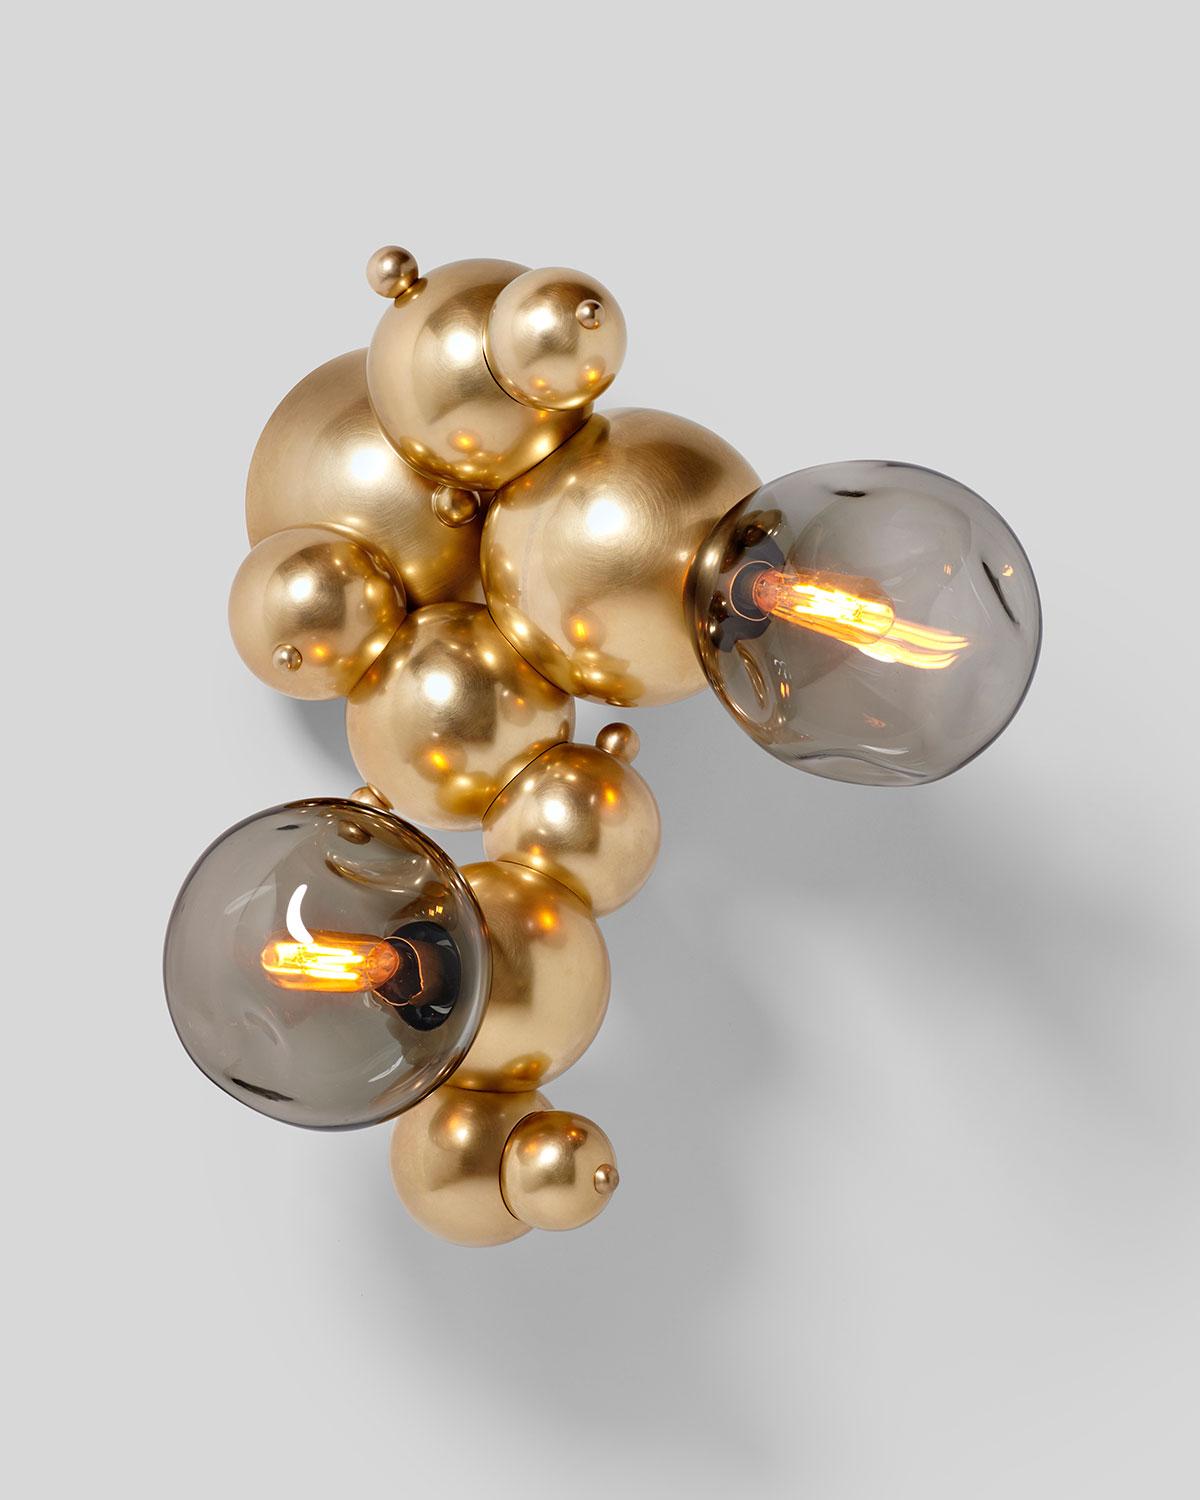 Organic, sculptural cascading sconce with two hand blown glass lights, designed from interlocking spun brass spheres. Inspired by soap bubbles and botryoidal hematite, Rosie Li's 